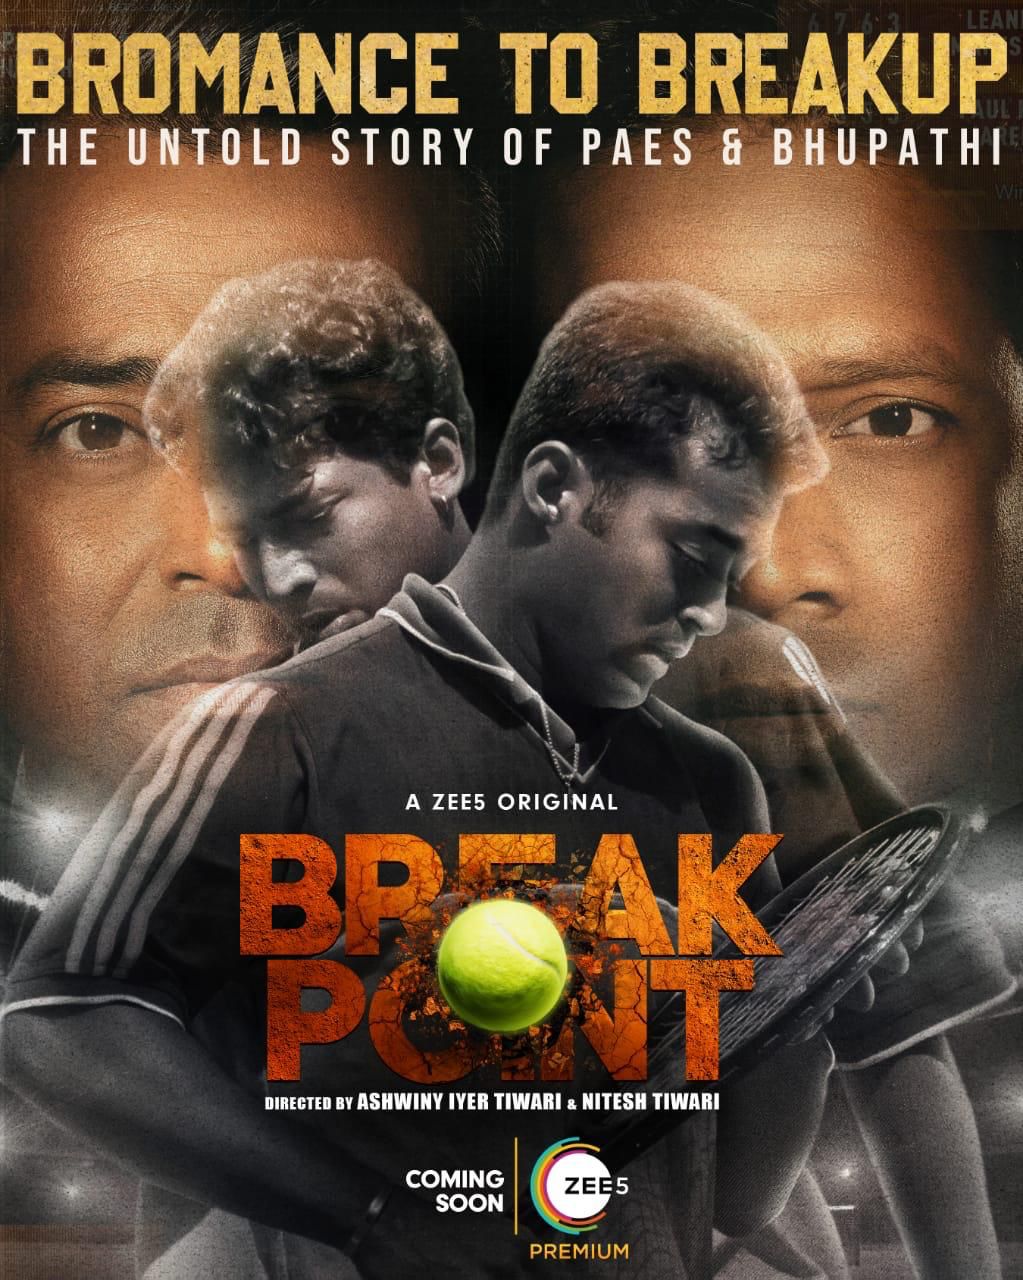 Leander Paes and Mahesh Bhupathi's 'First Look' in 'Break Point' screened!